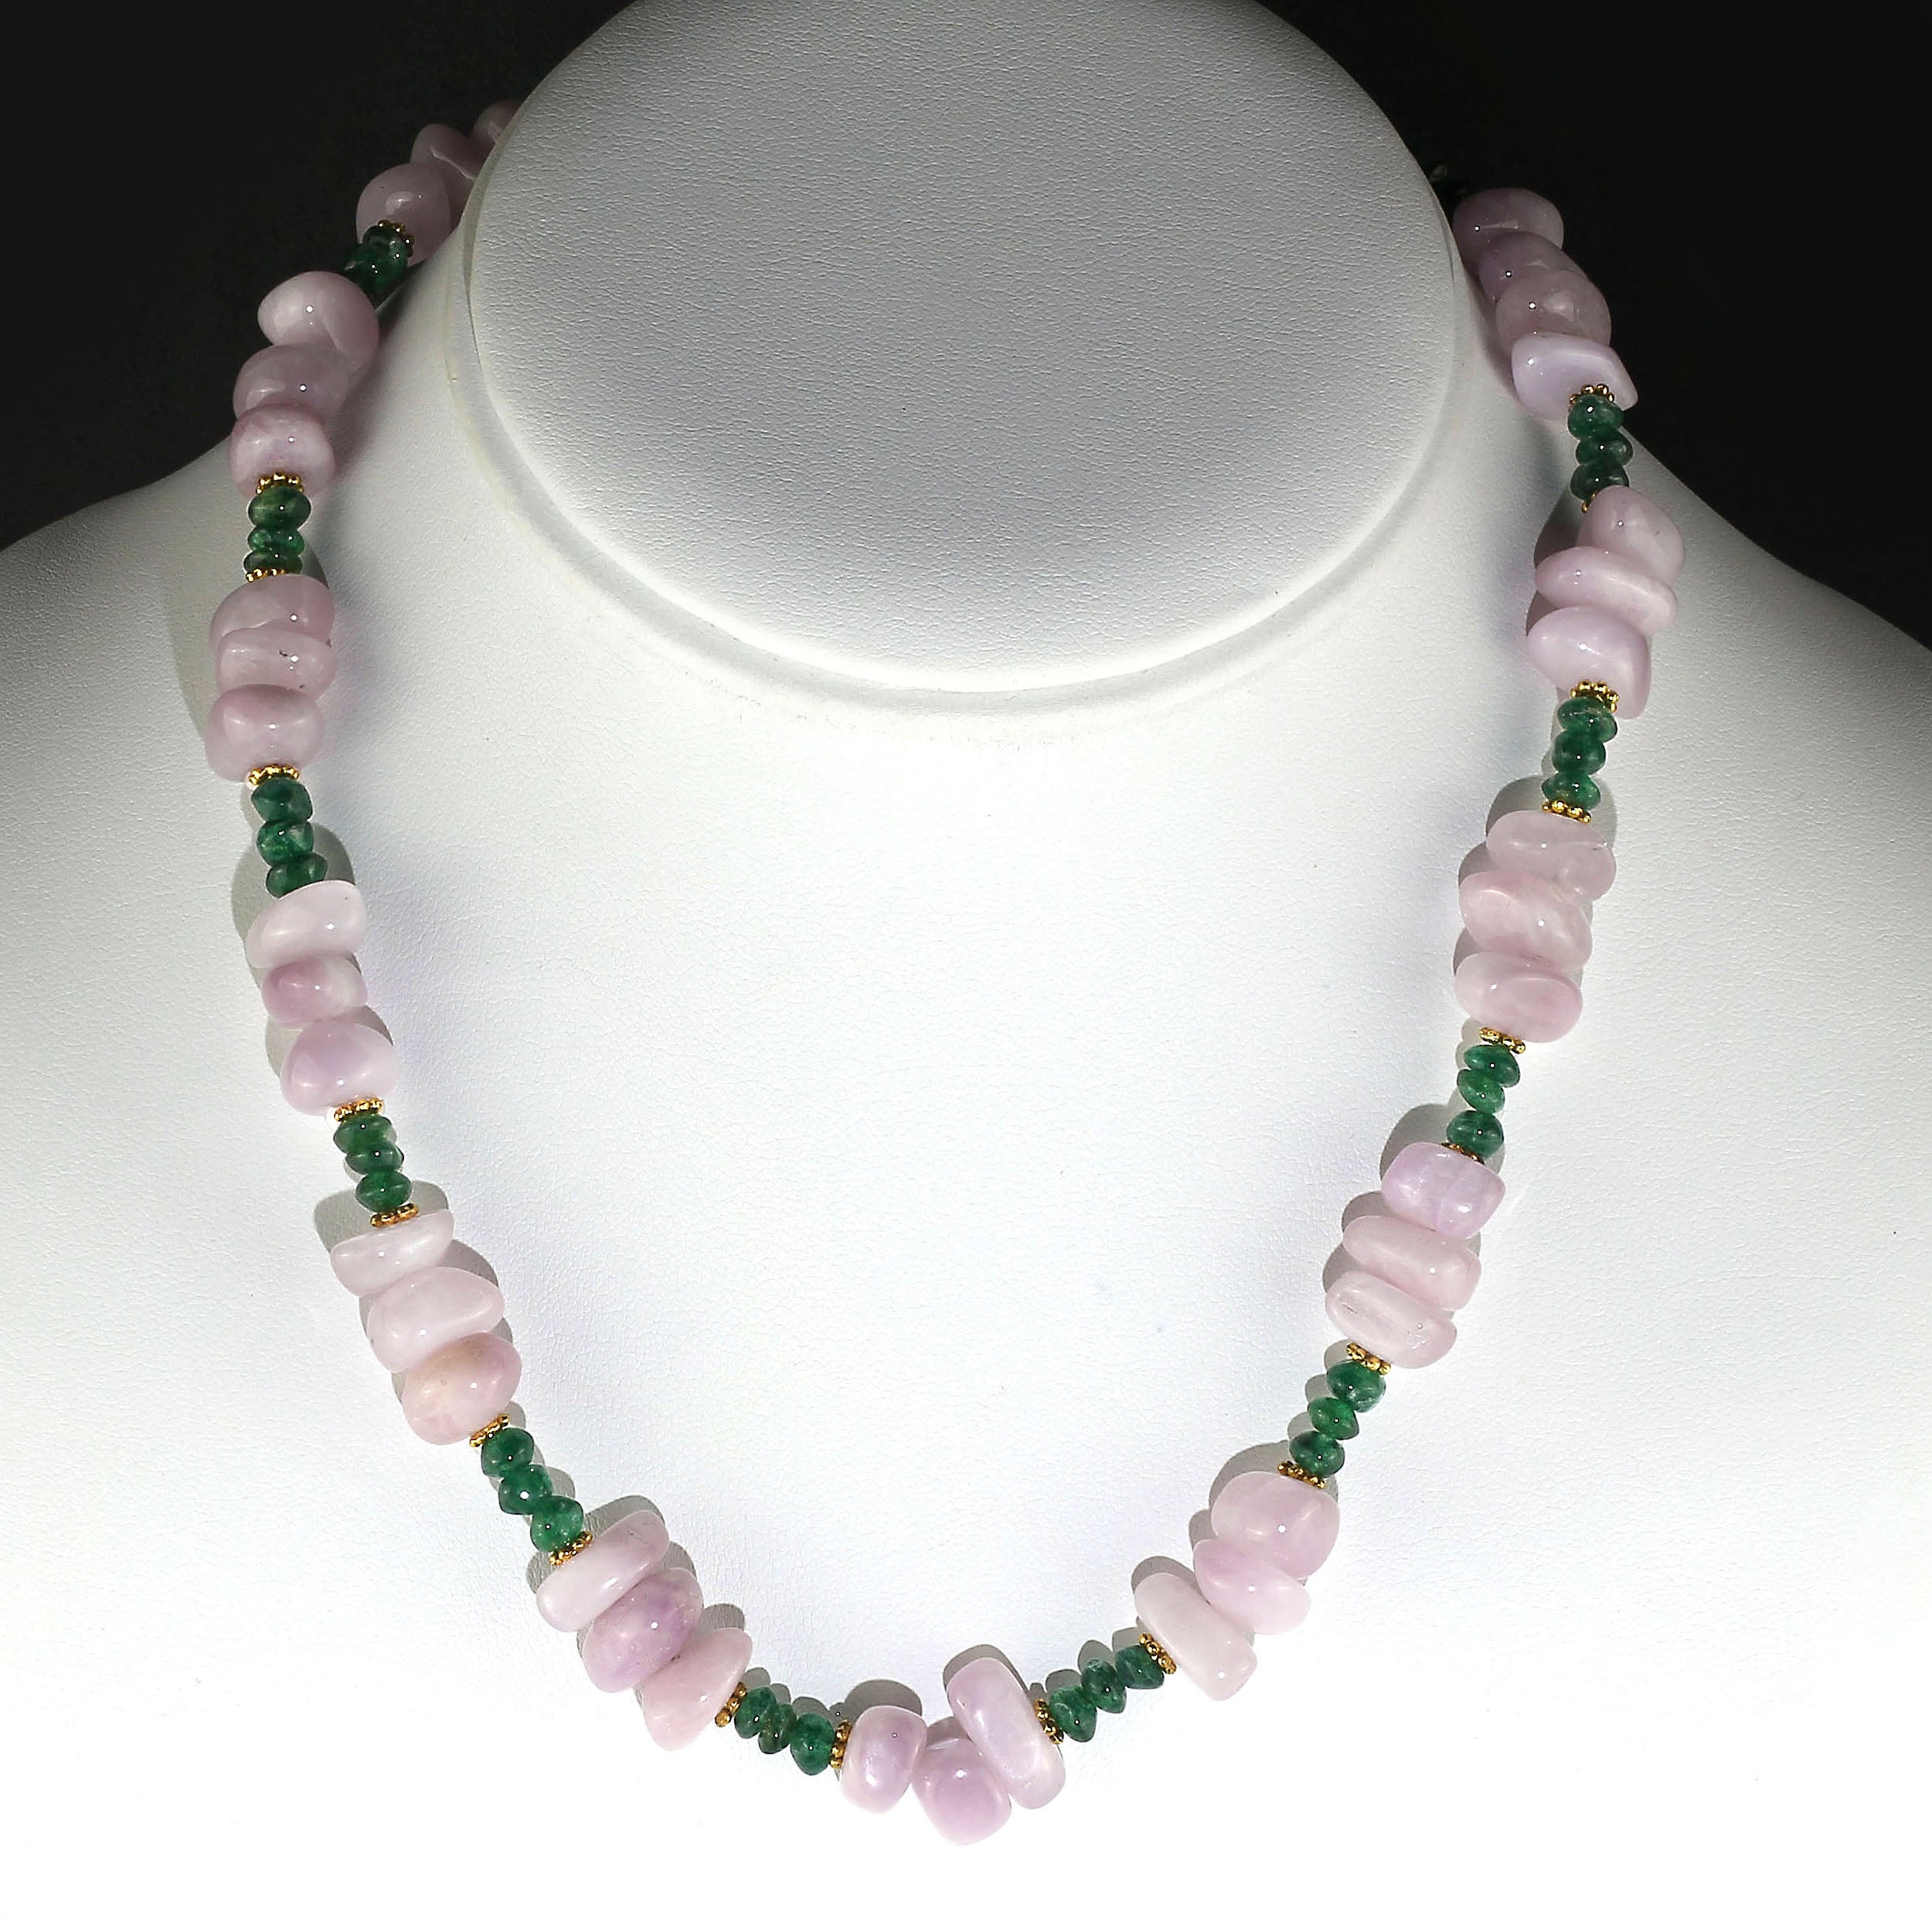 AJD Glowing Kunzite and Aventurine Necklace for Summer Fun For Sale